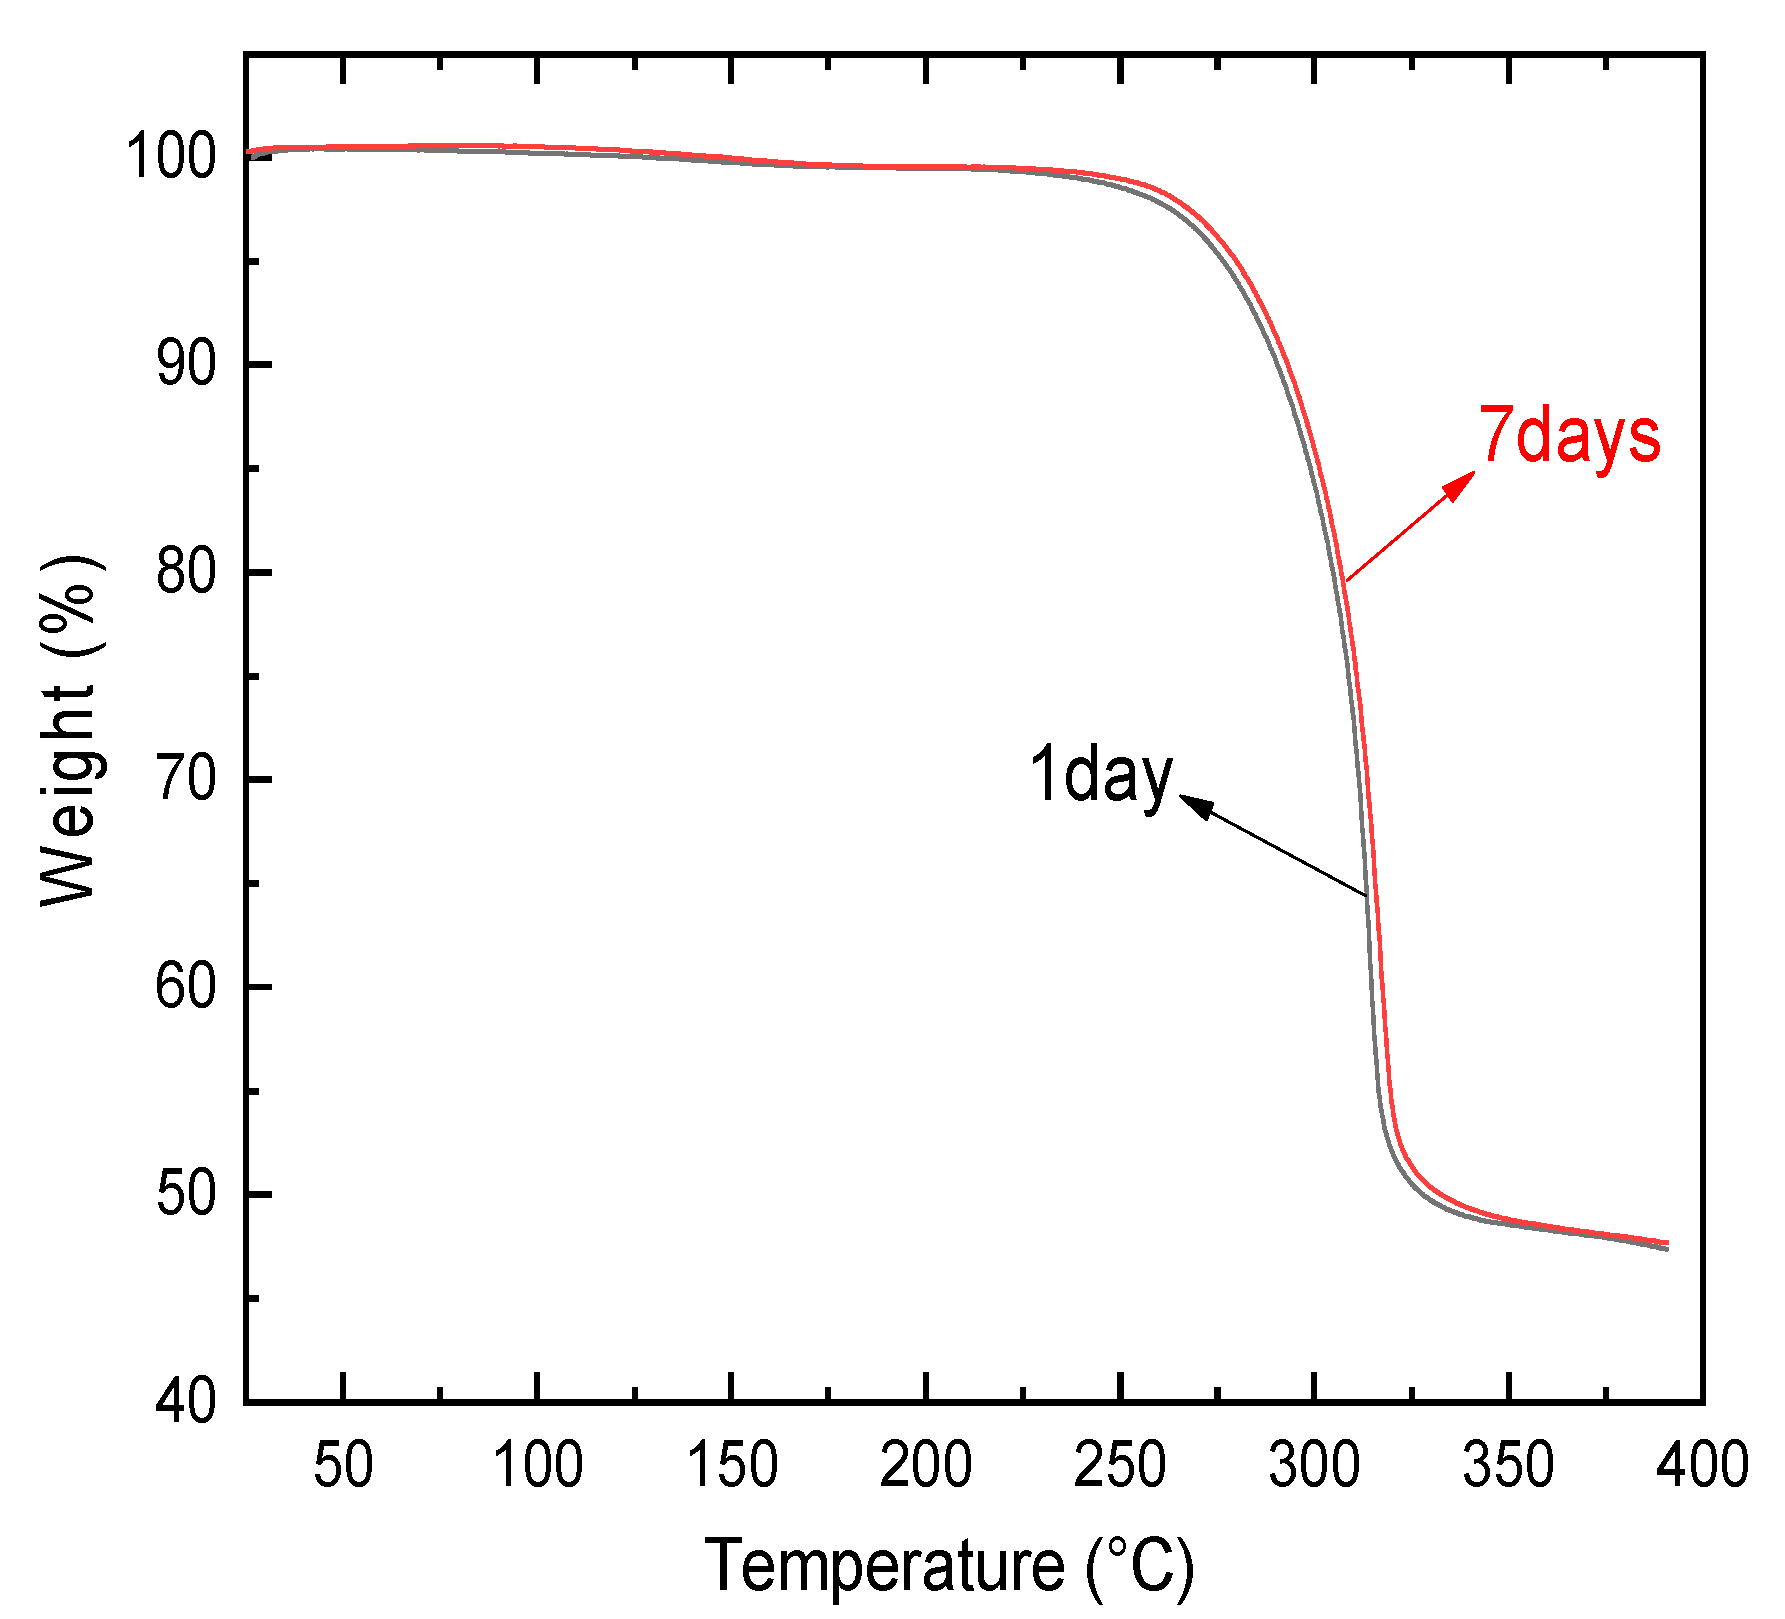 The graph of control power and temperature versus elapsed time